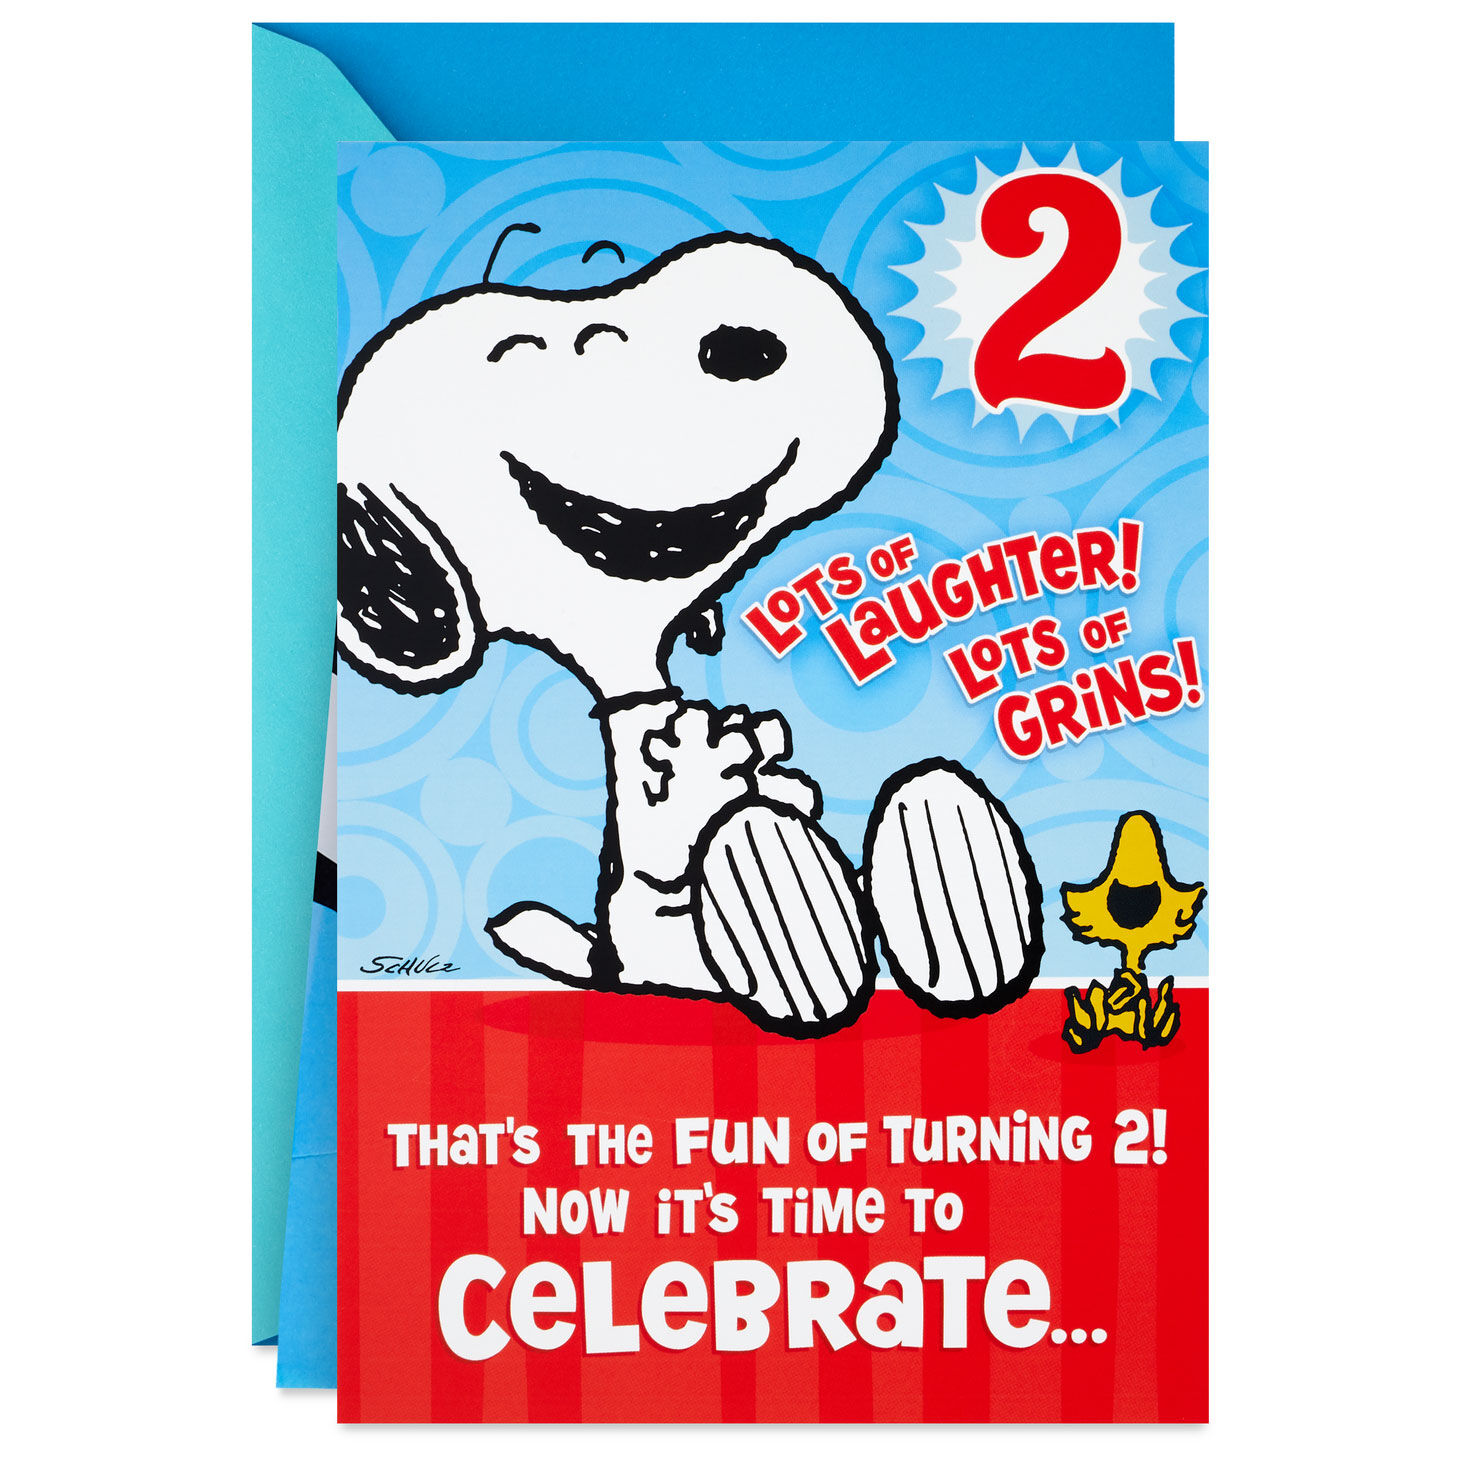 Peanuts® Snoopy and Woodstock Pop-Up Hug 2nd Birthday Card for only USD 5.59 | Hallmark